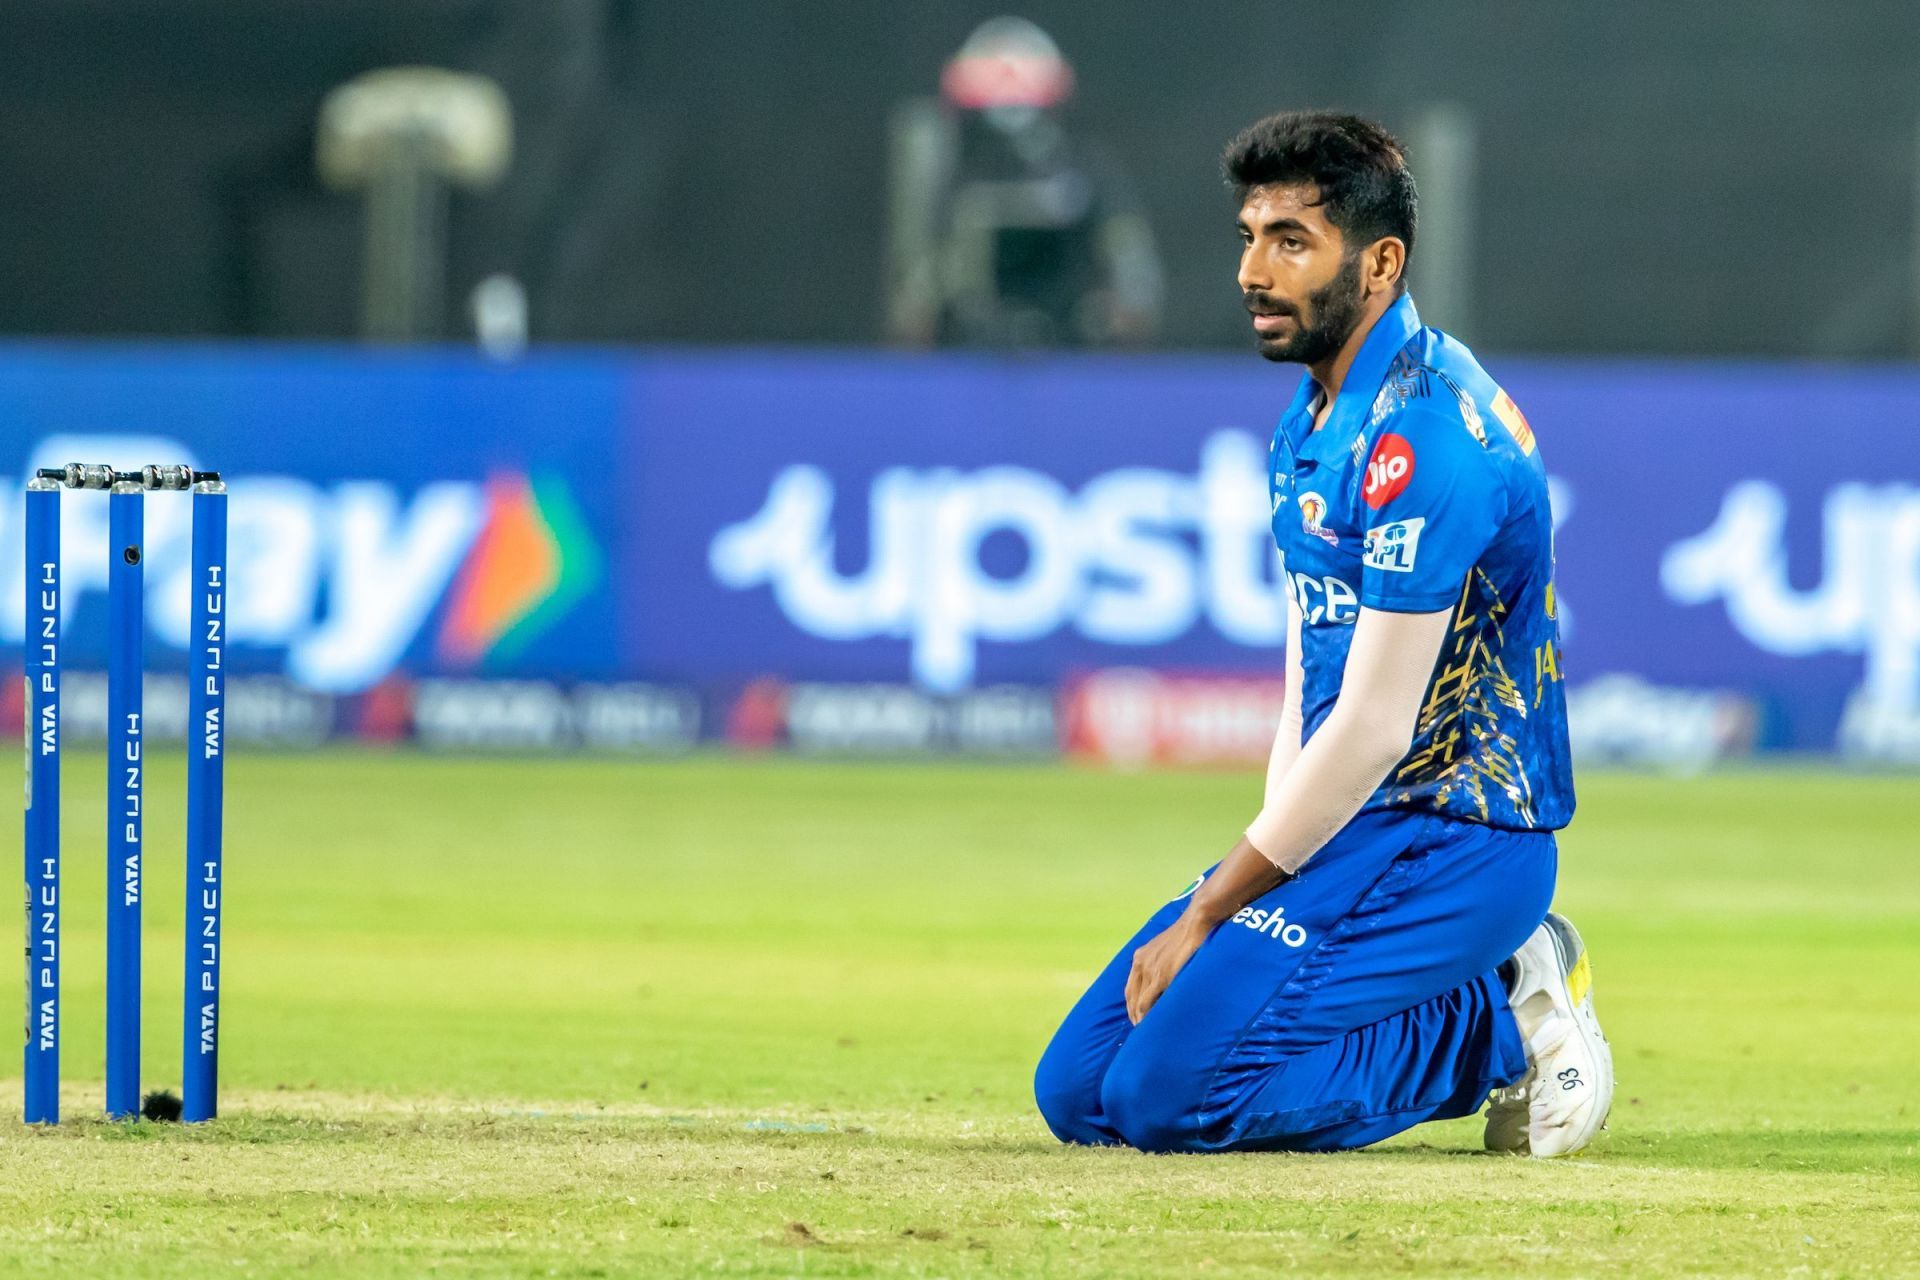 Jasprit Bumrah has only managed five wickets in IPL 2022 - 1/3rd of his worst season in the last seven years (PC: IPL).